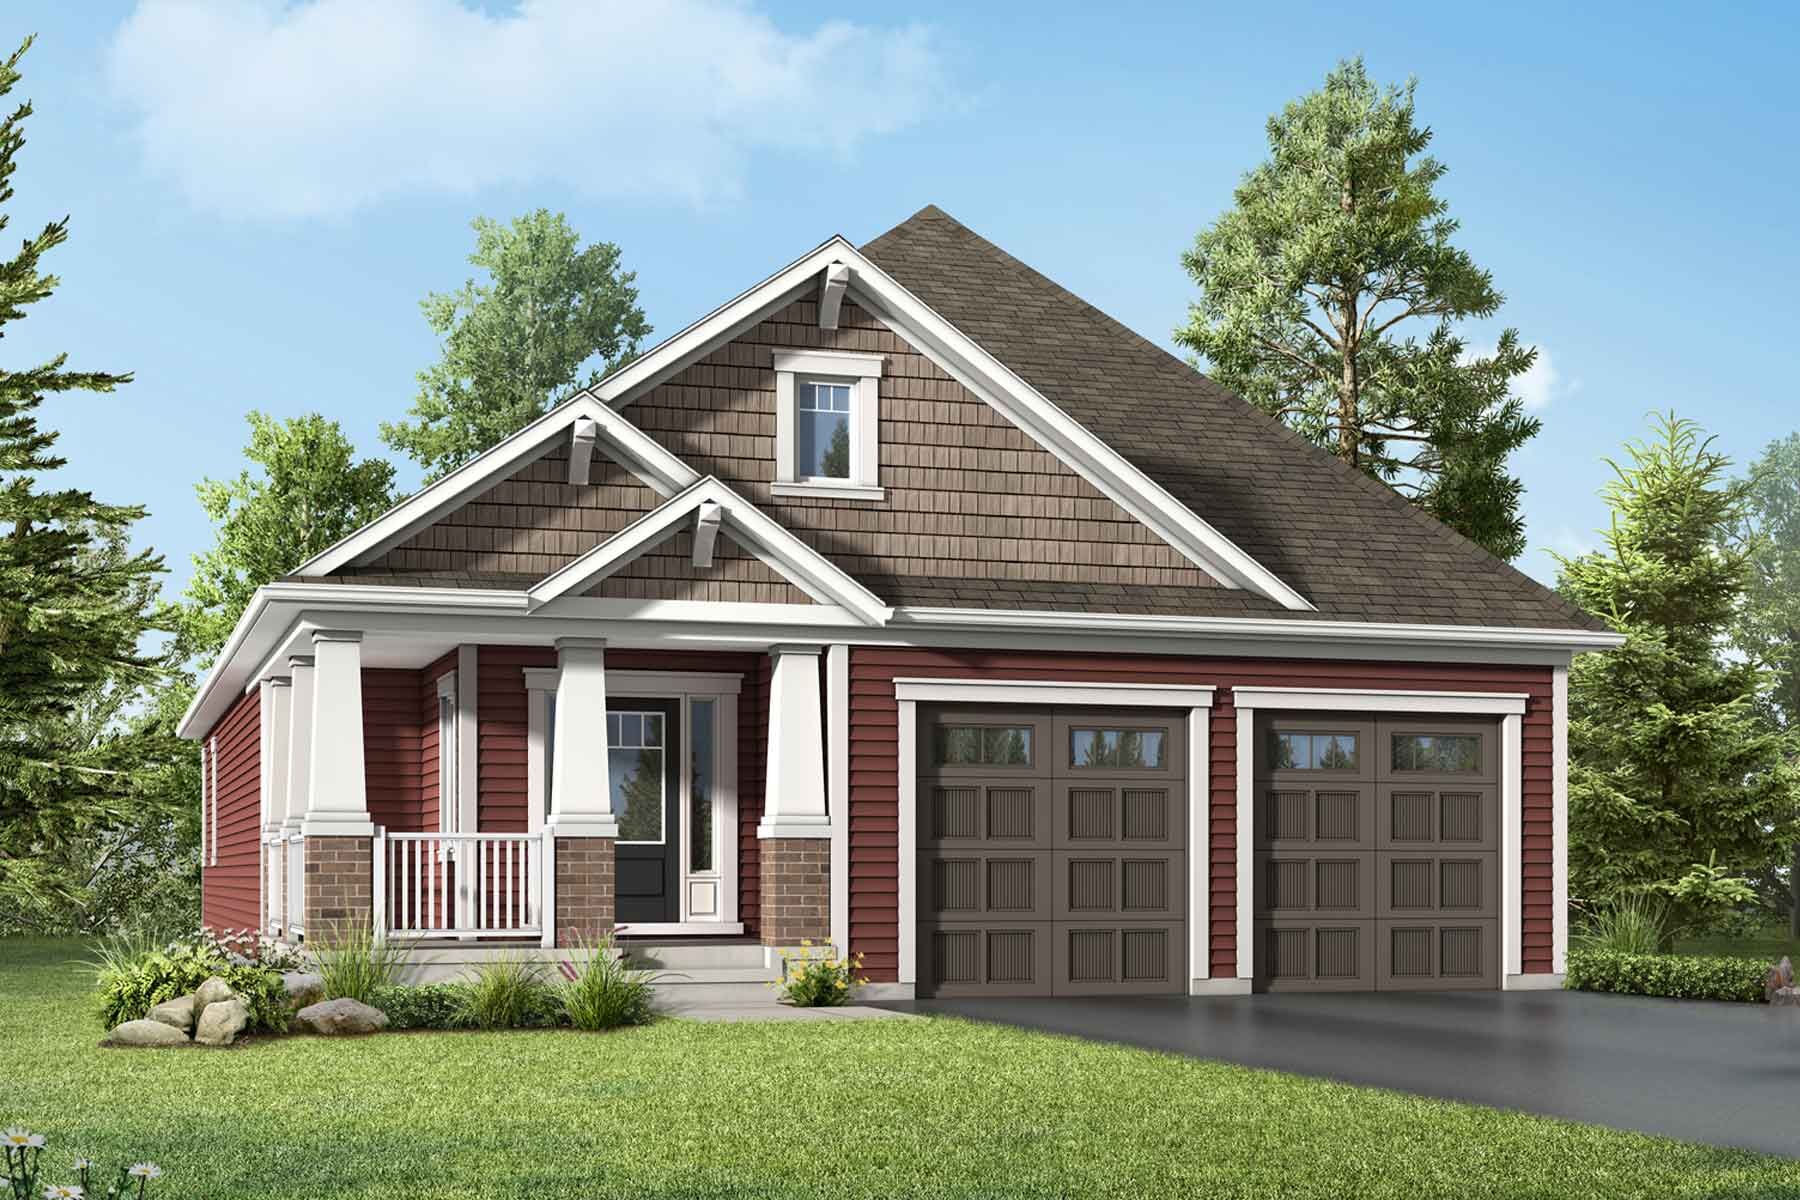 A craftsman style elevation with double car garage and a covered porch with pillars.